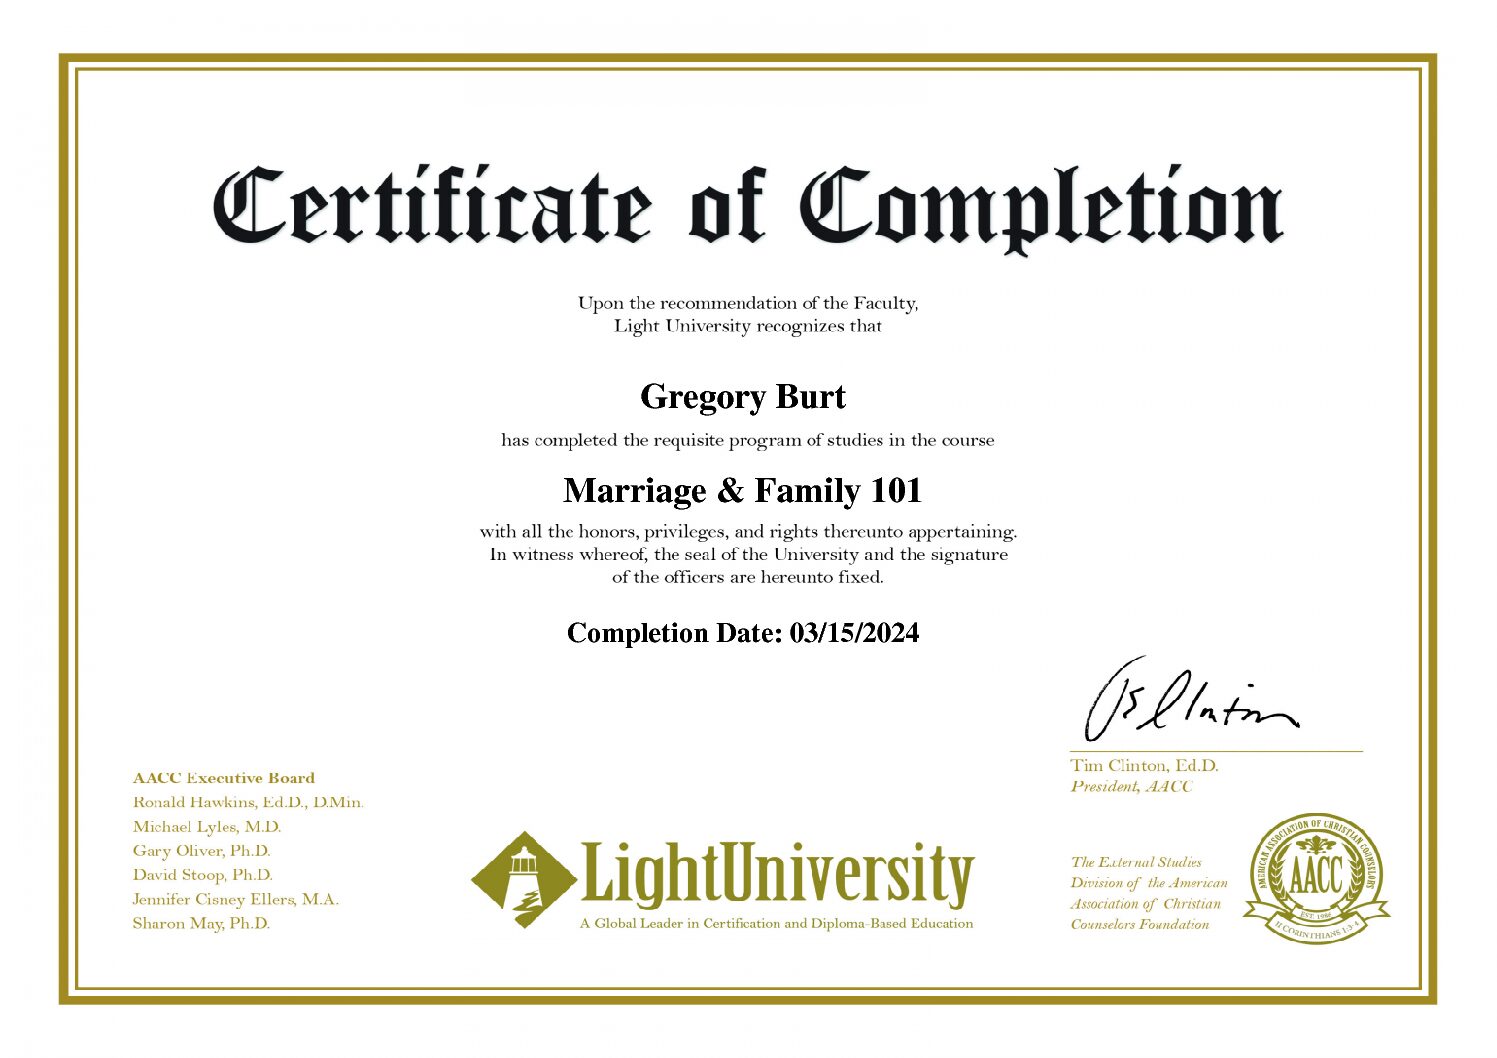 certification-Marriage-&-Family-101-gregory.burt